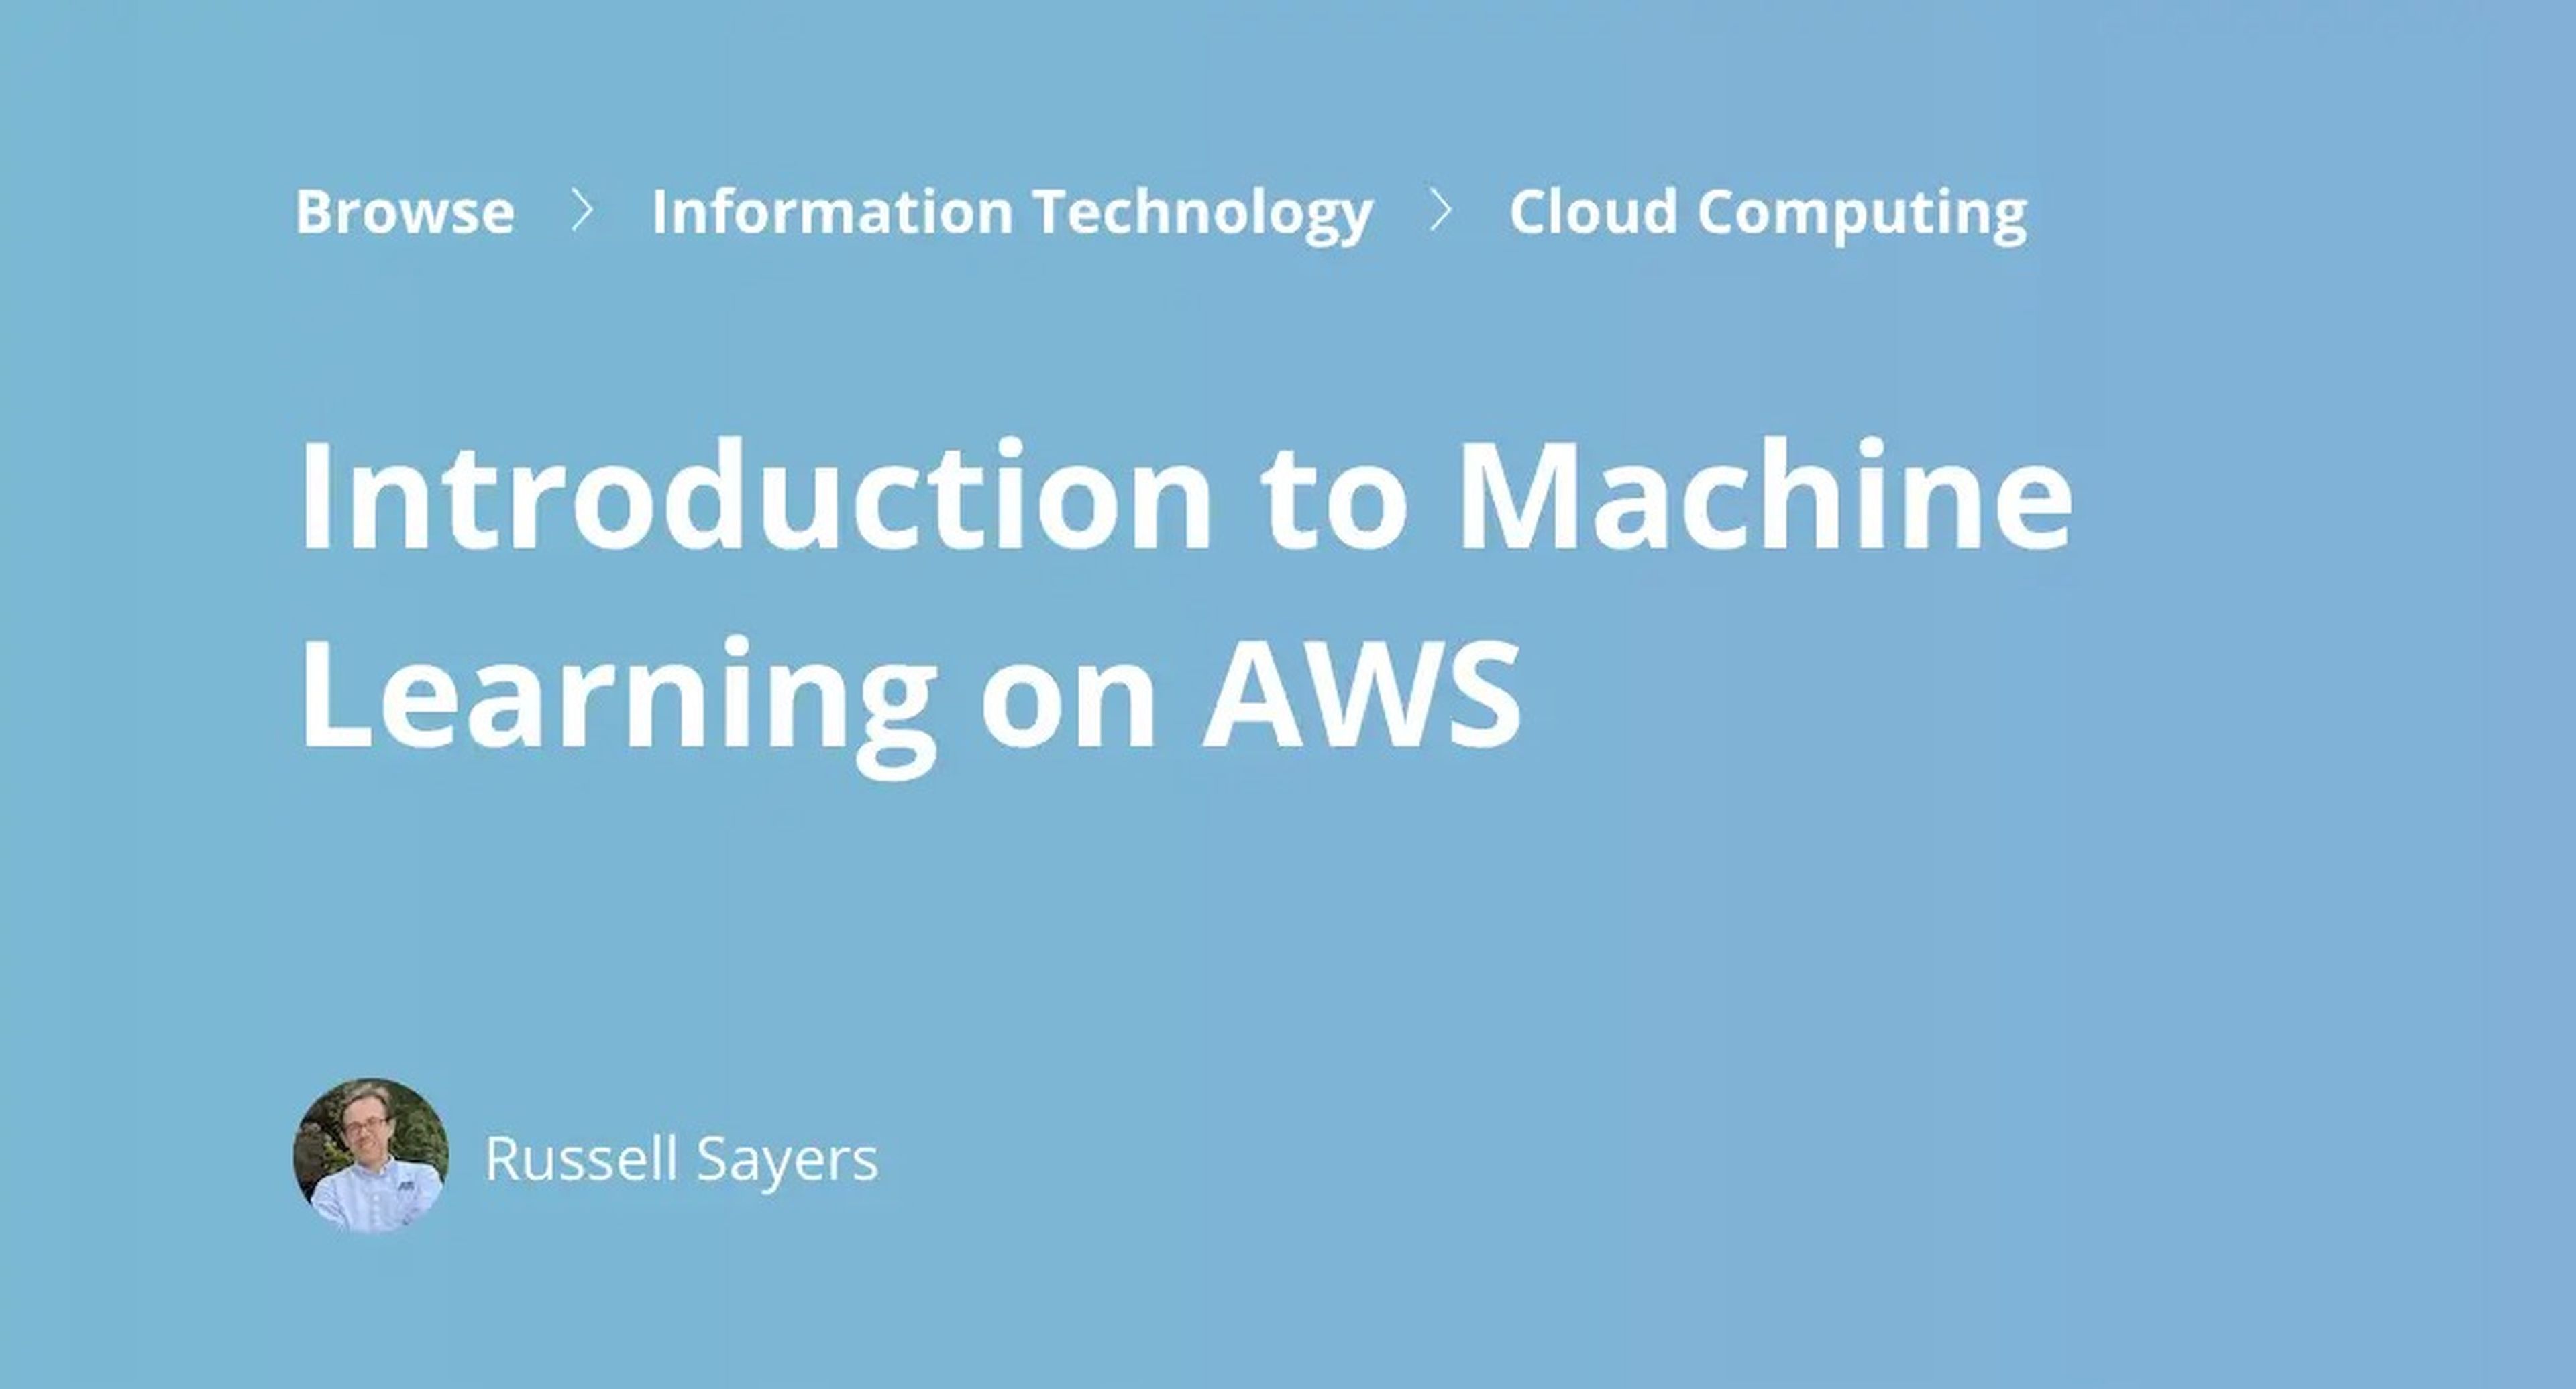 Introduction to Machine Learning on AWS Coursera course